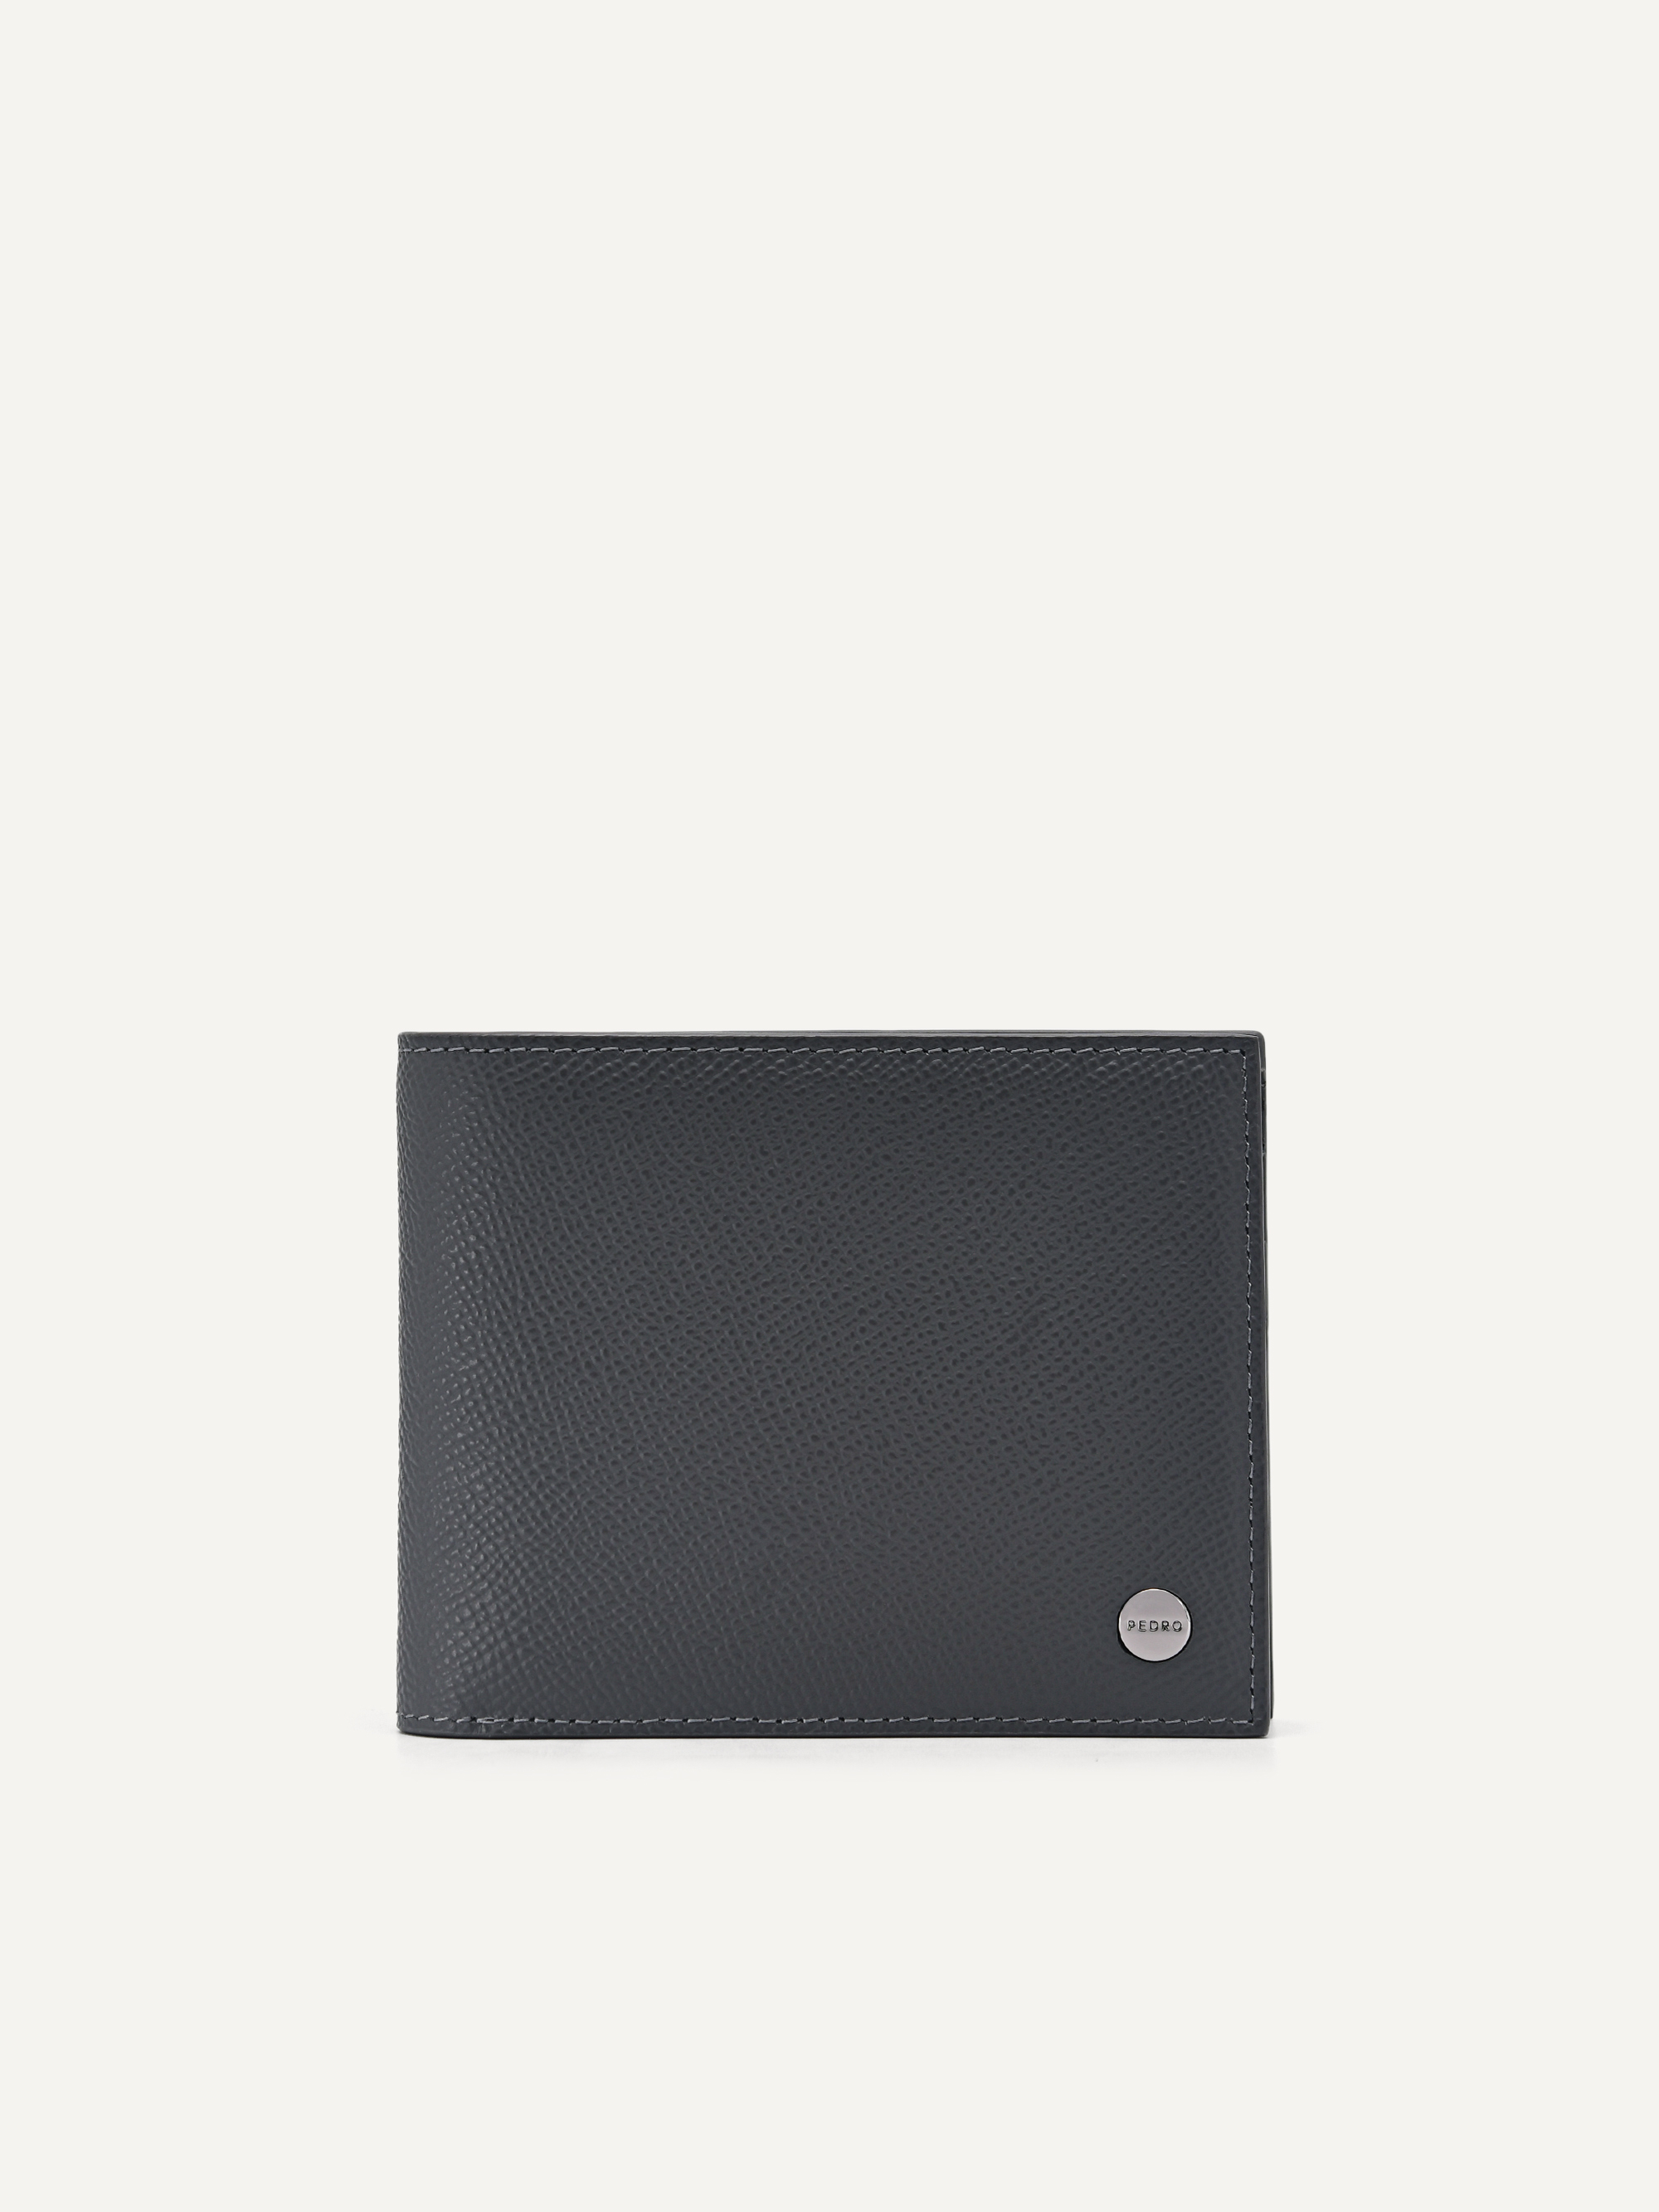 Dark Grey Leather Wallet with Insert - PEDRO